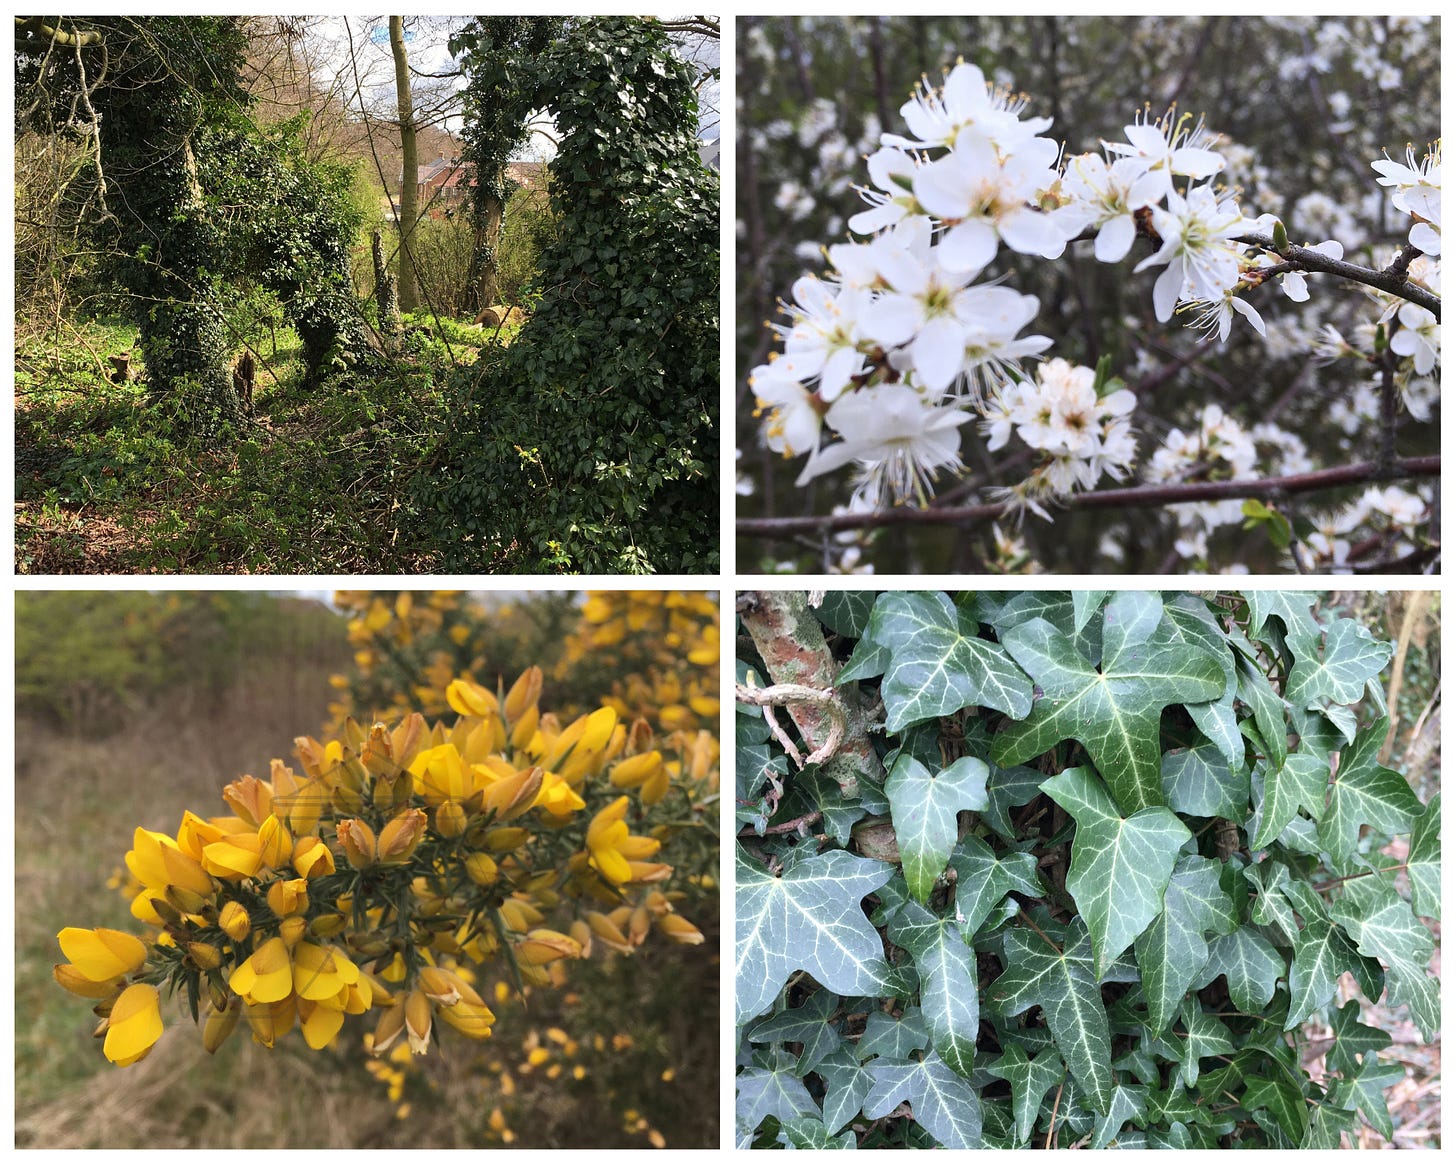 Collage of 4 photos showing, clockwise from top left, trees, Hawthorn flowers, Ivy, Gorse flowers.